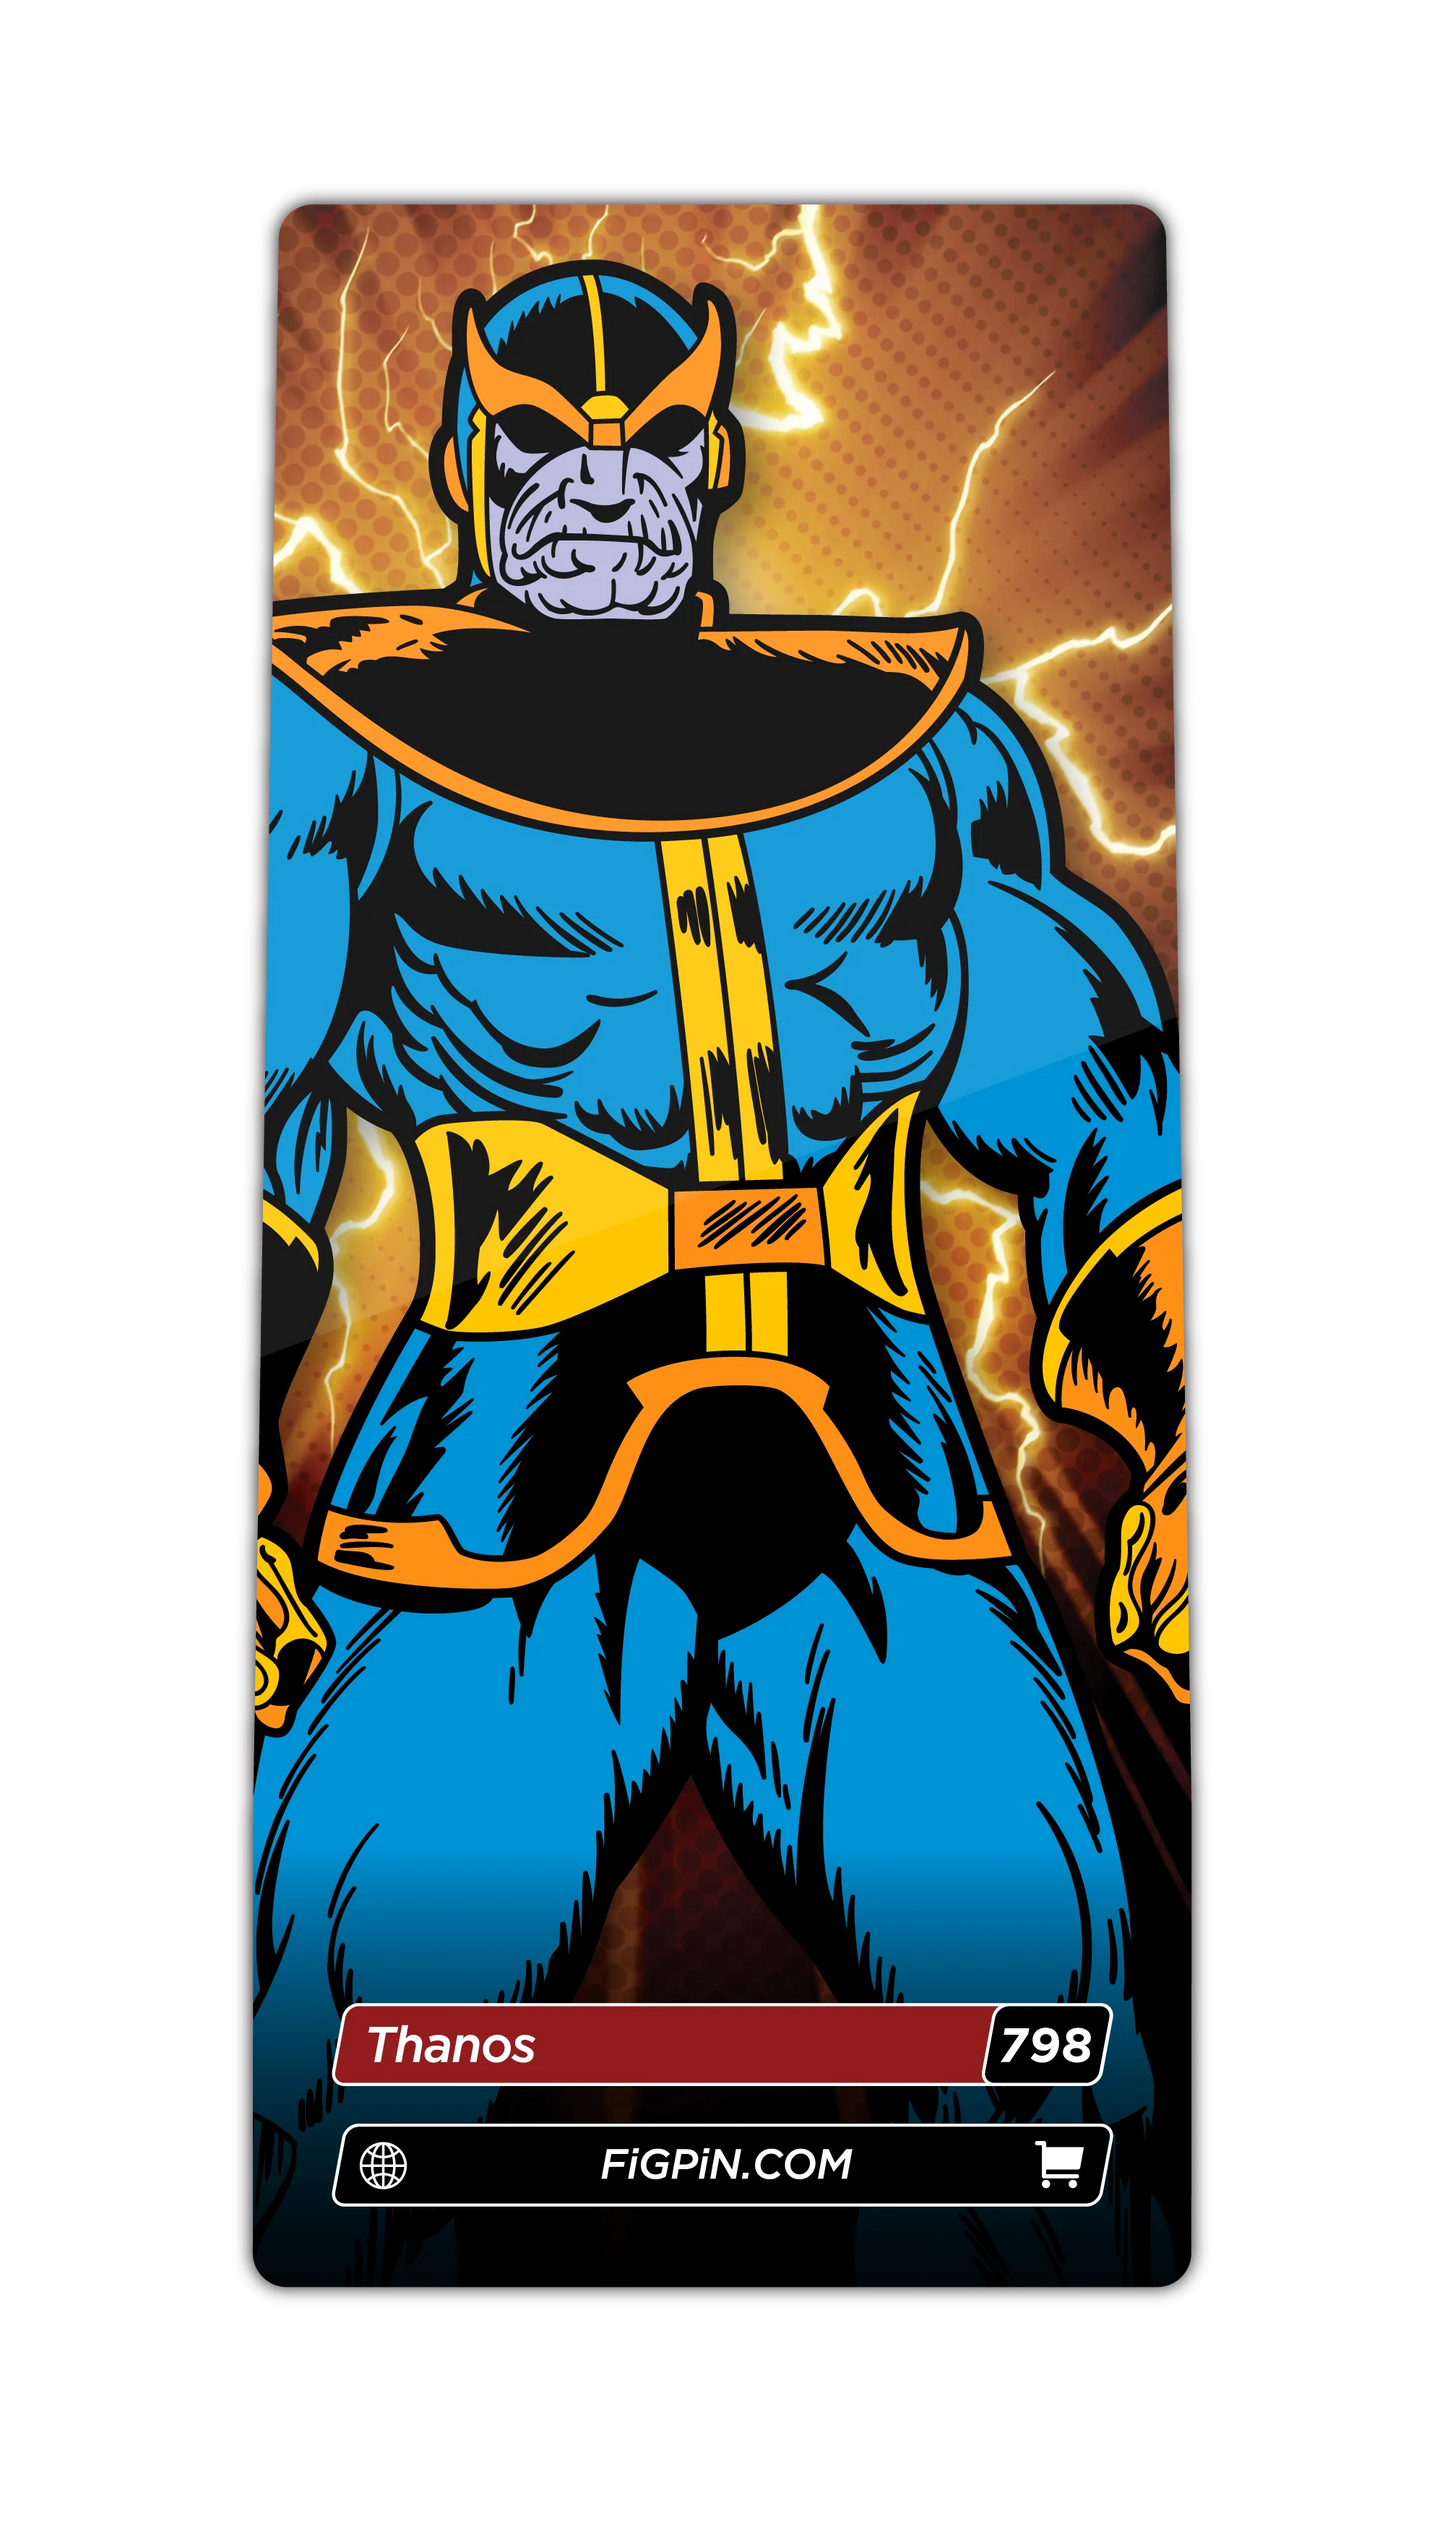 FiGPiN Thanos (798) Property: Marvel Classic